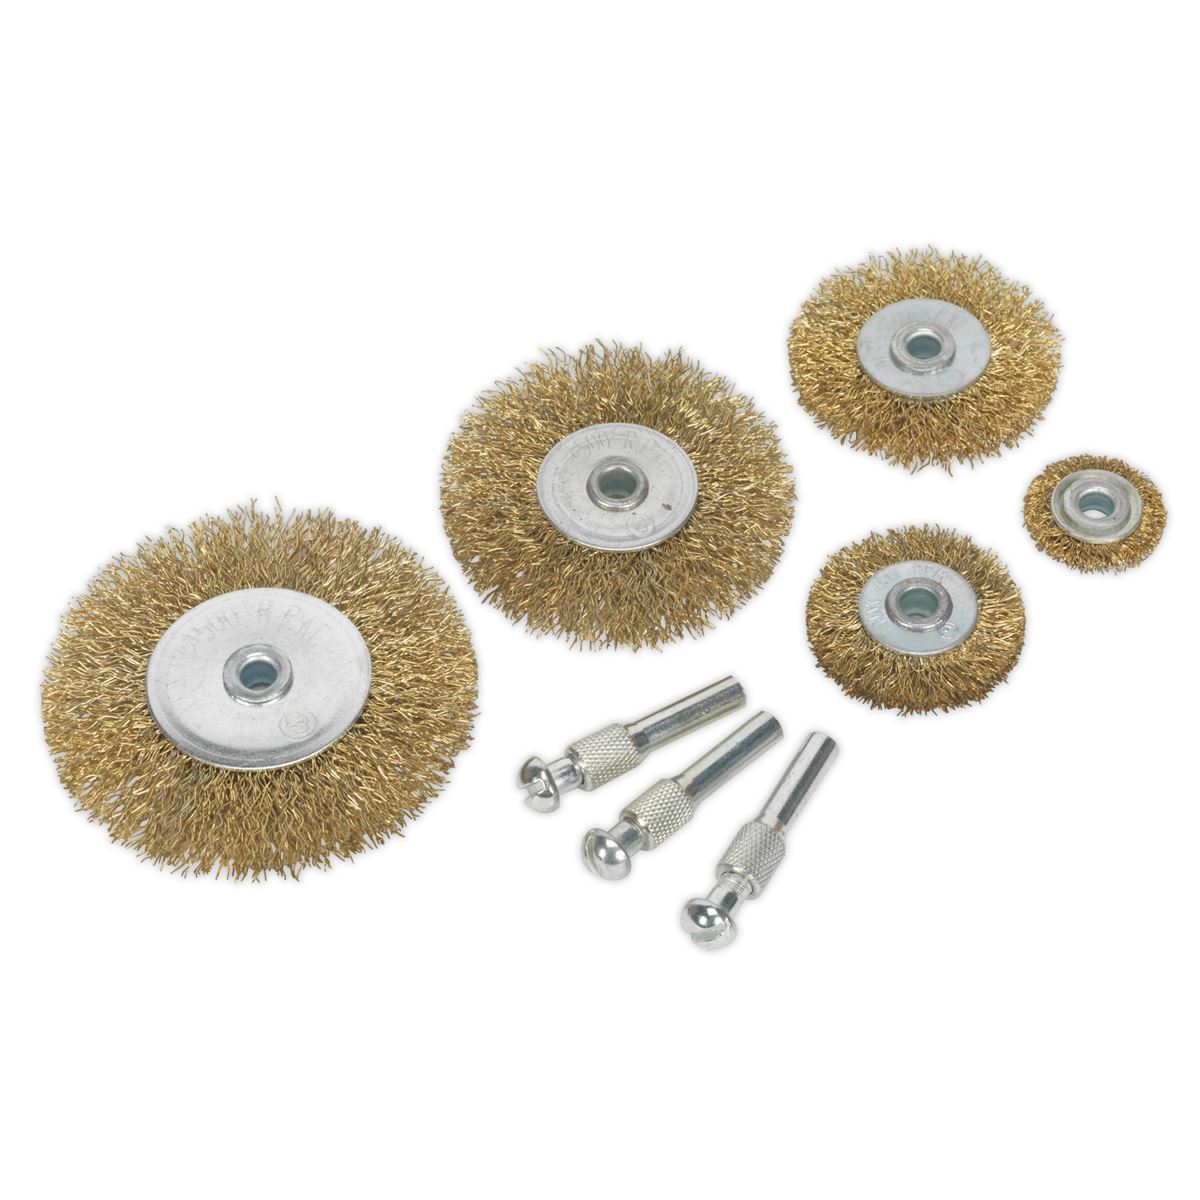 Sealey Crimped Wire Brush Set 8pc Brassed